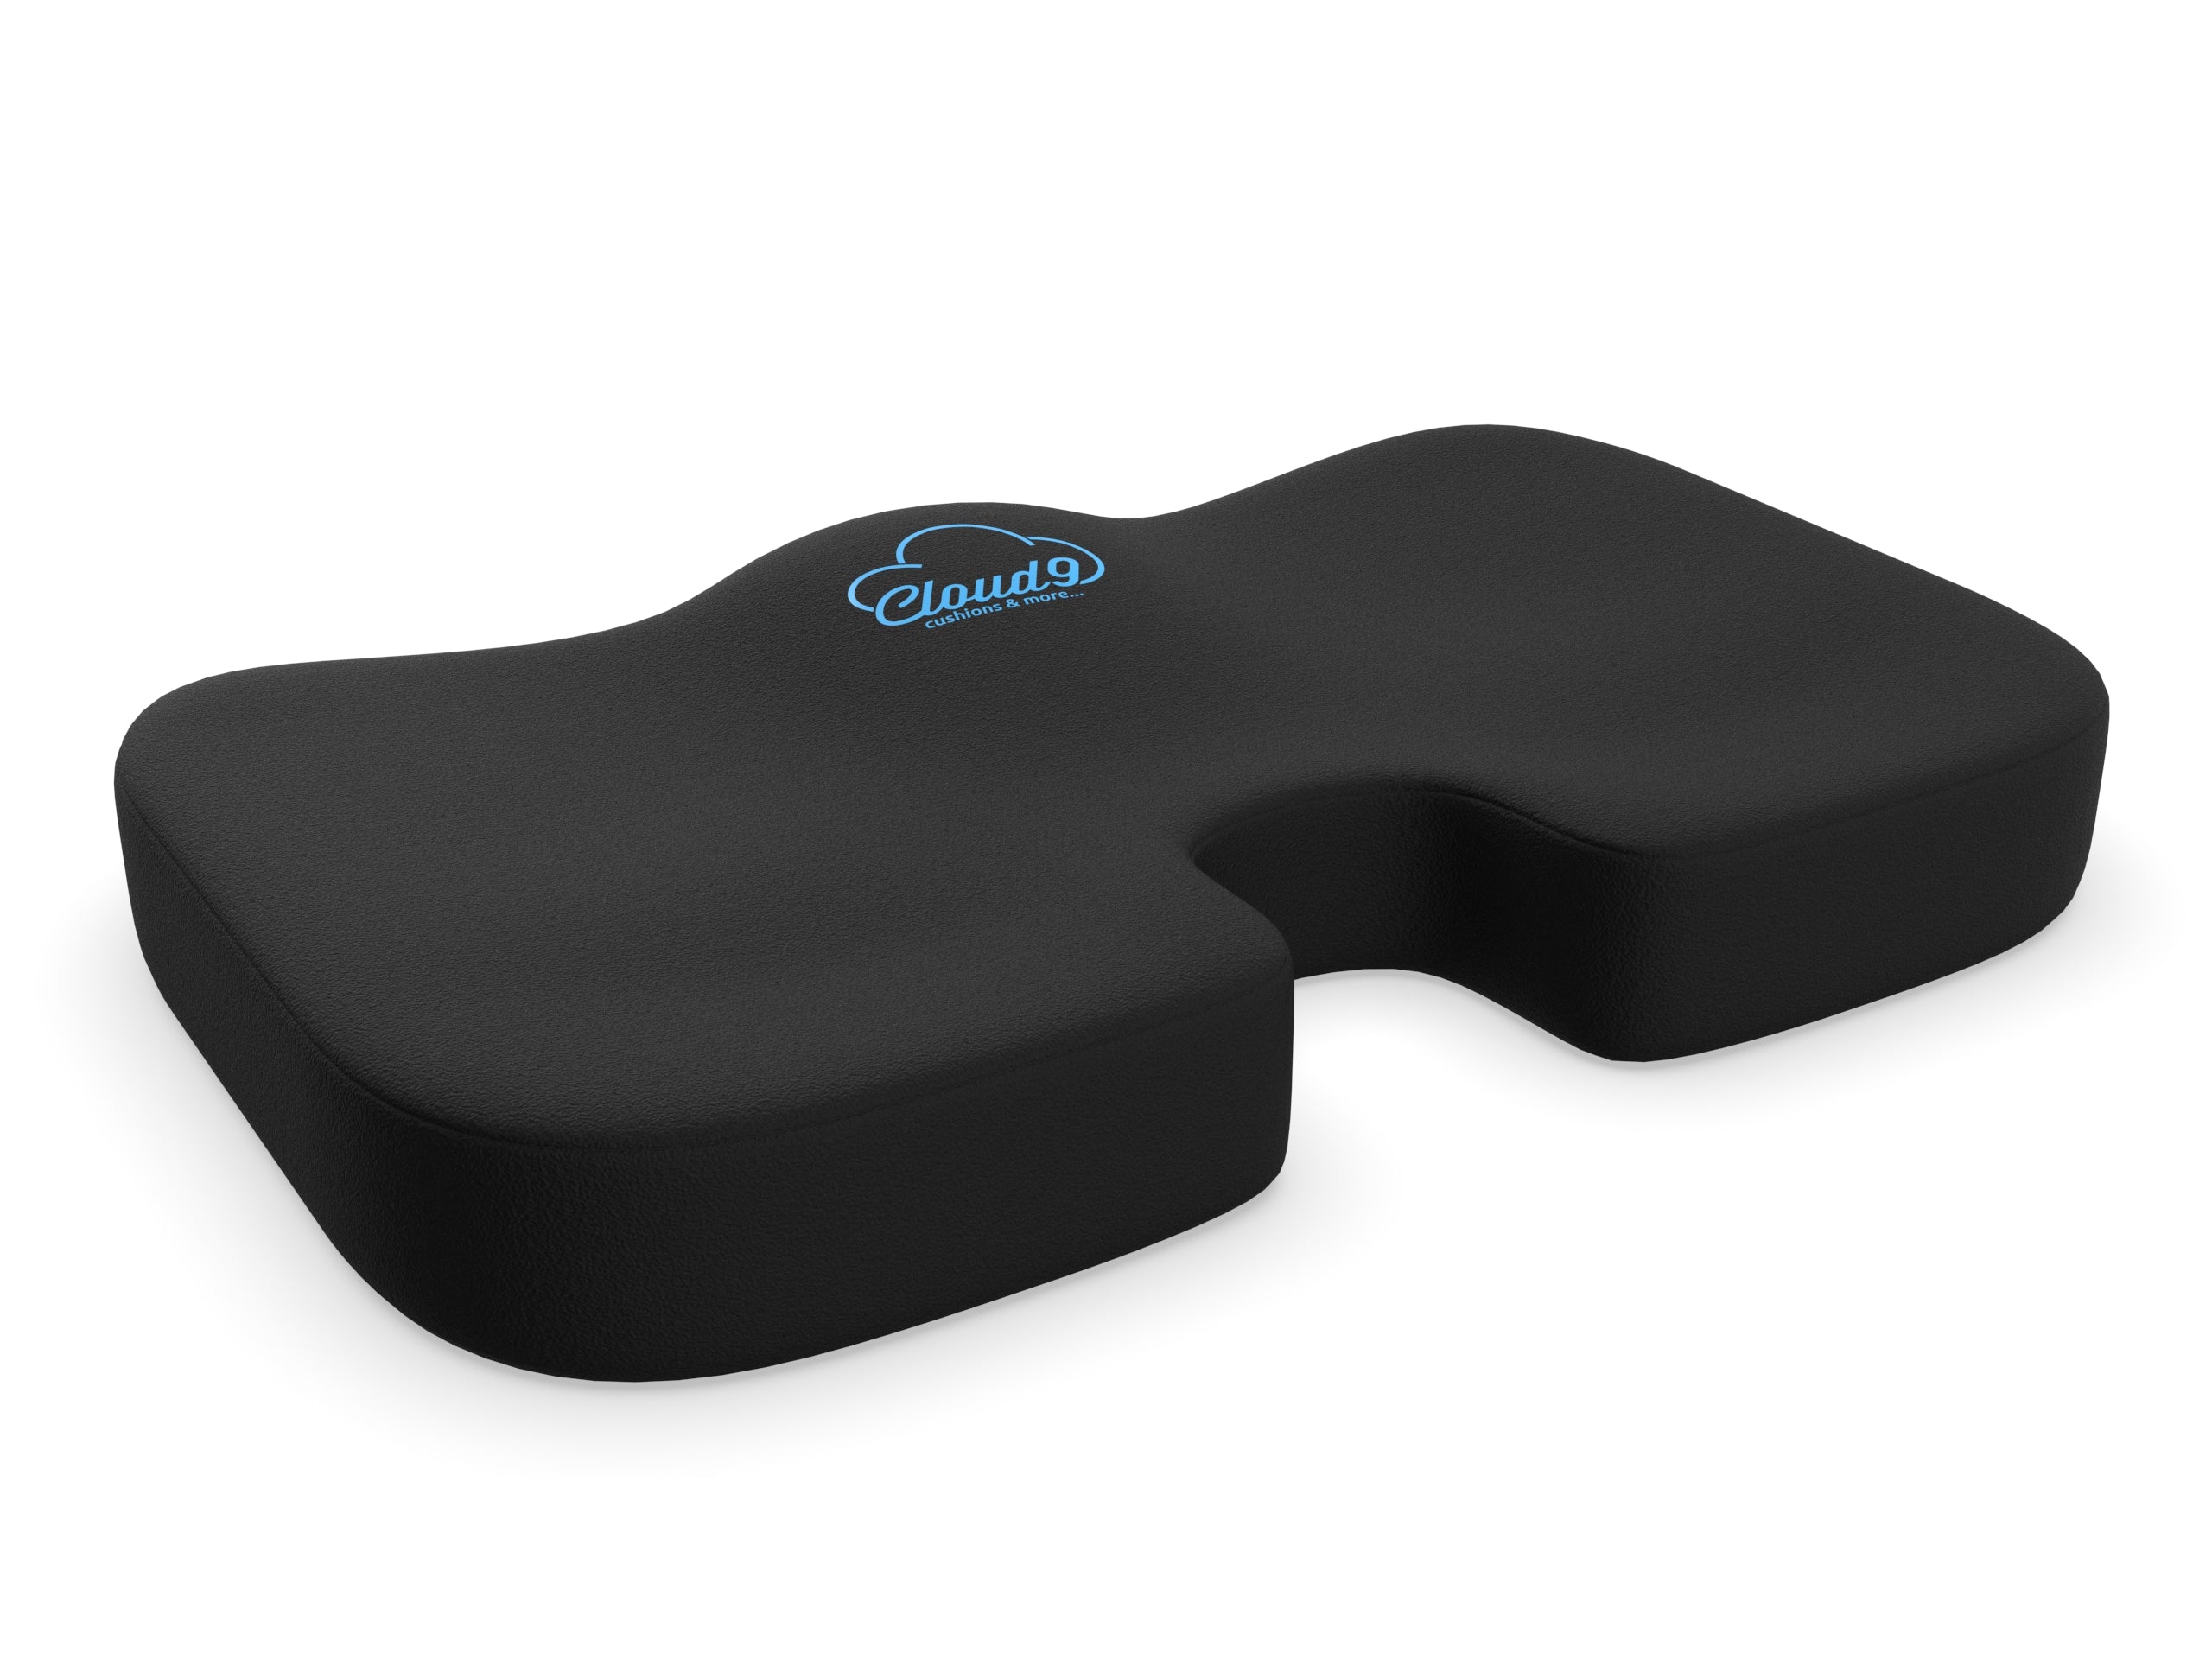 CloudSeat - The Back Pain Relief Cushions